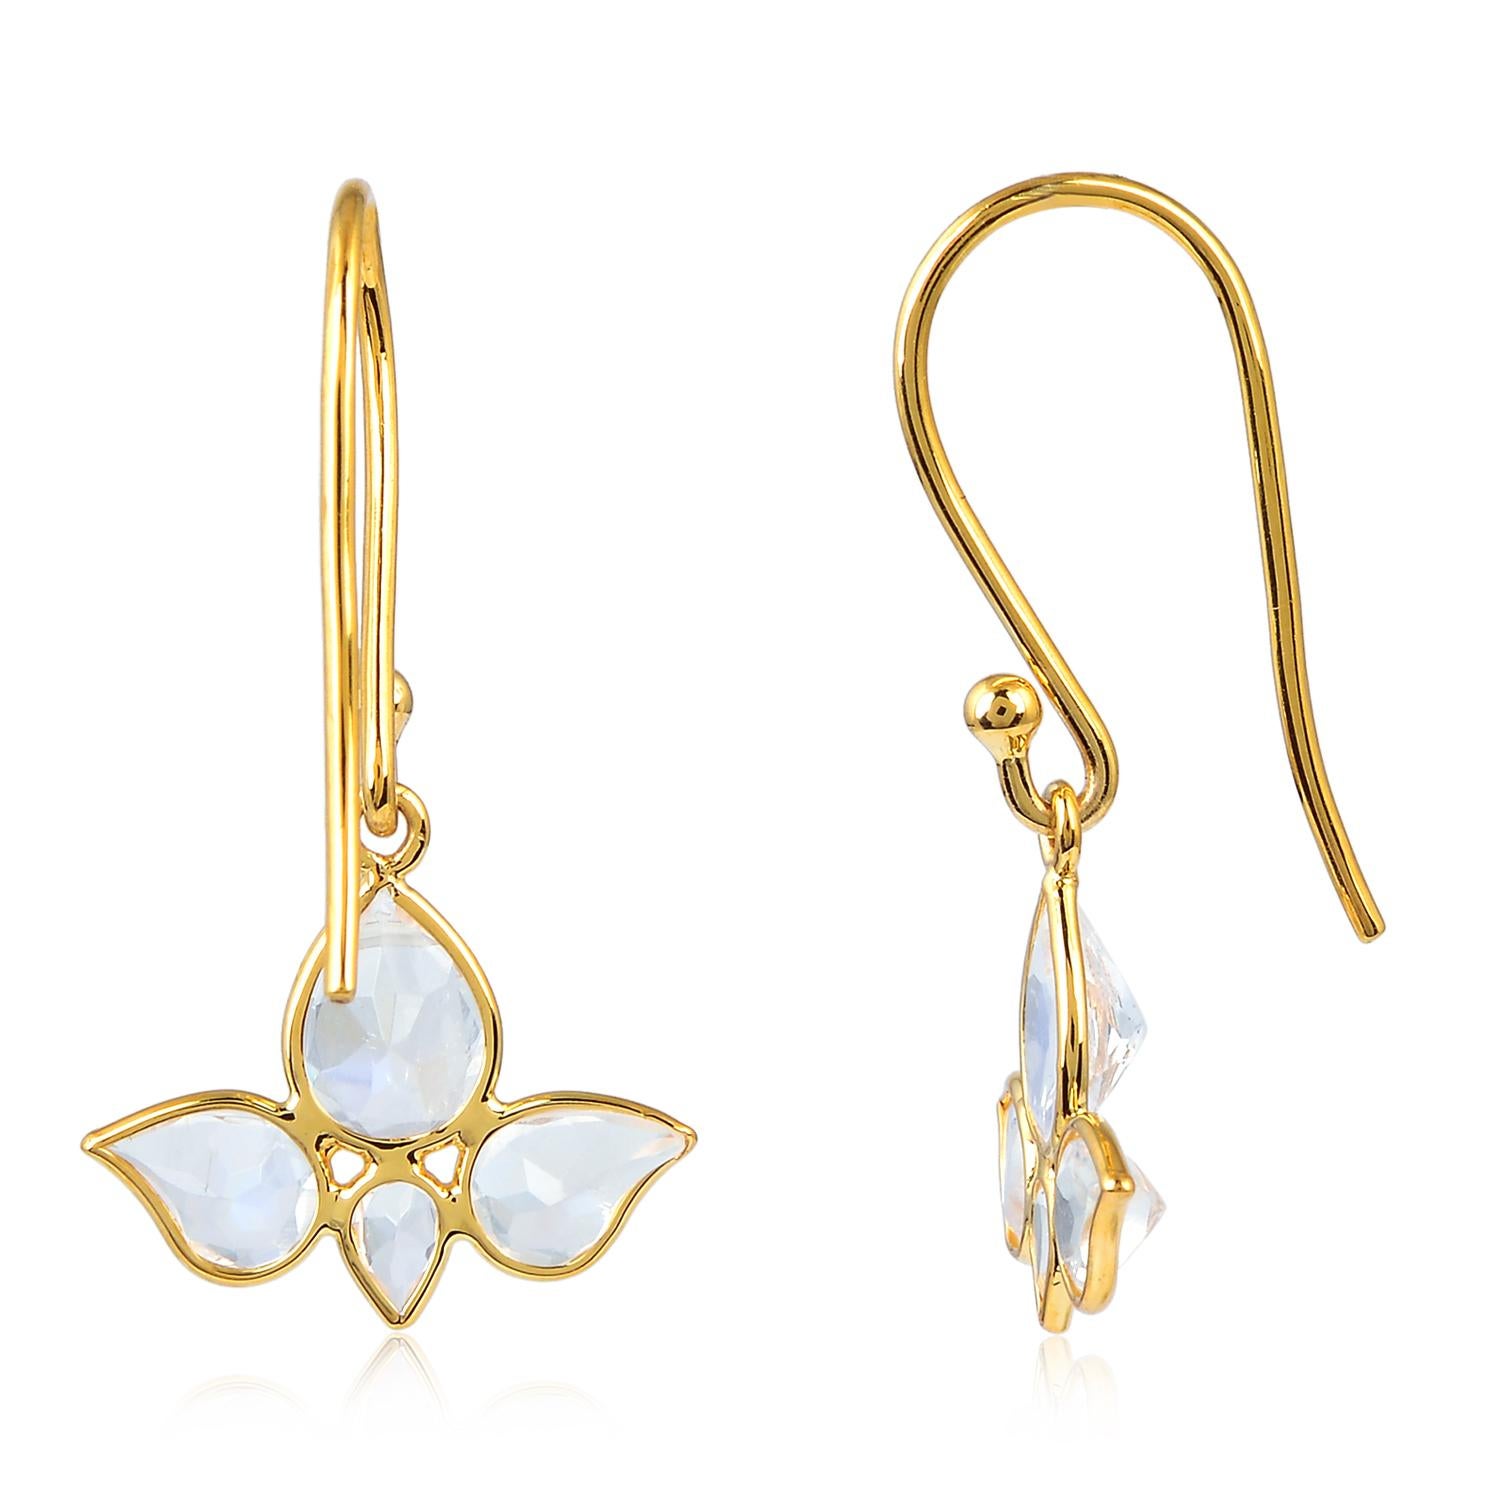 Handmade from 18-karat gold, these beautiful lotus earrings are set with 2.78 carats of rainbow moonstone. 

FOLLOW  MEGHNA JEWELS storefront to view the latest collection & exclusive pieces.  Meghna Jewels is proudly rated as a Top Seller on